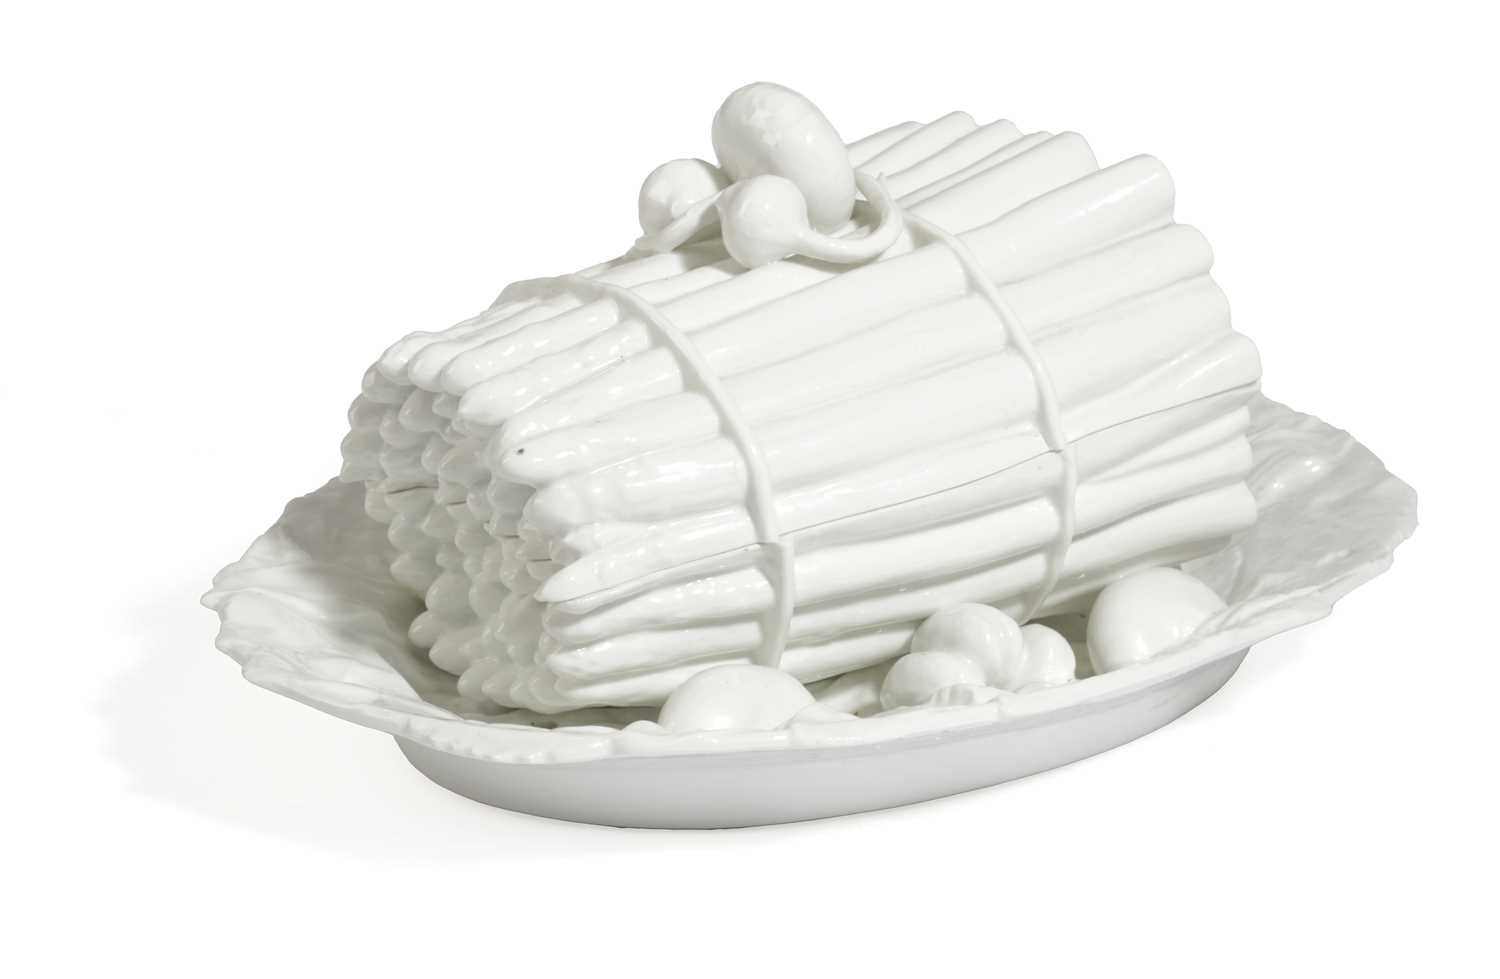 A PORCELAIN ASPARAGUS TUREEN AND COVER IN MEISSEN STYLE, 19TH CENTURY modelled as a large bundle